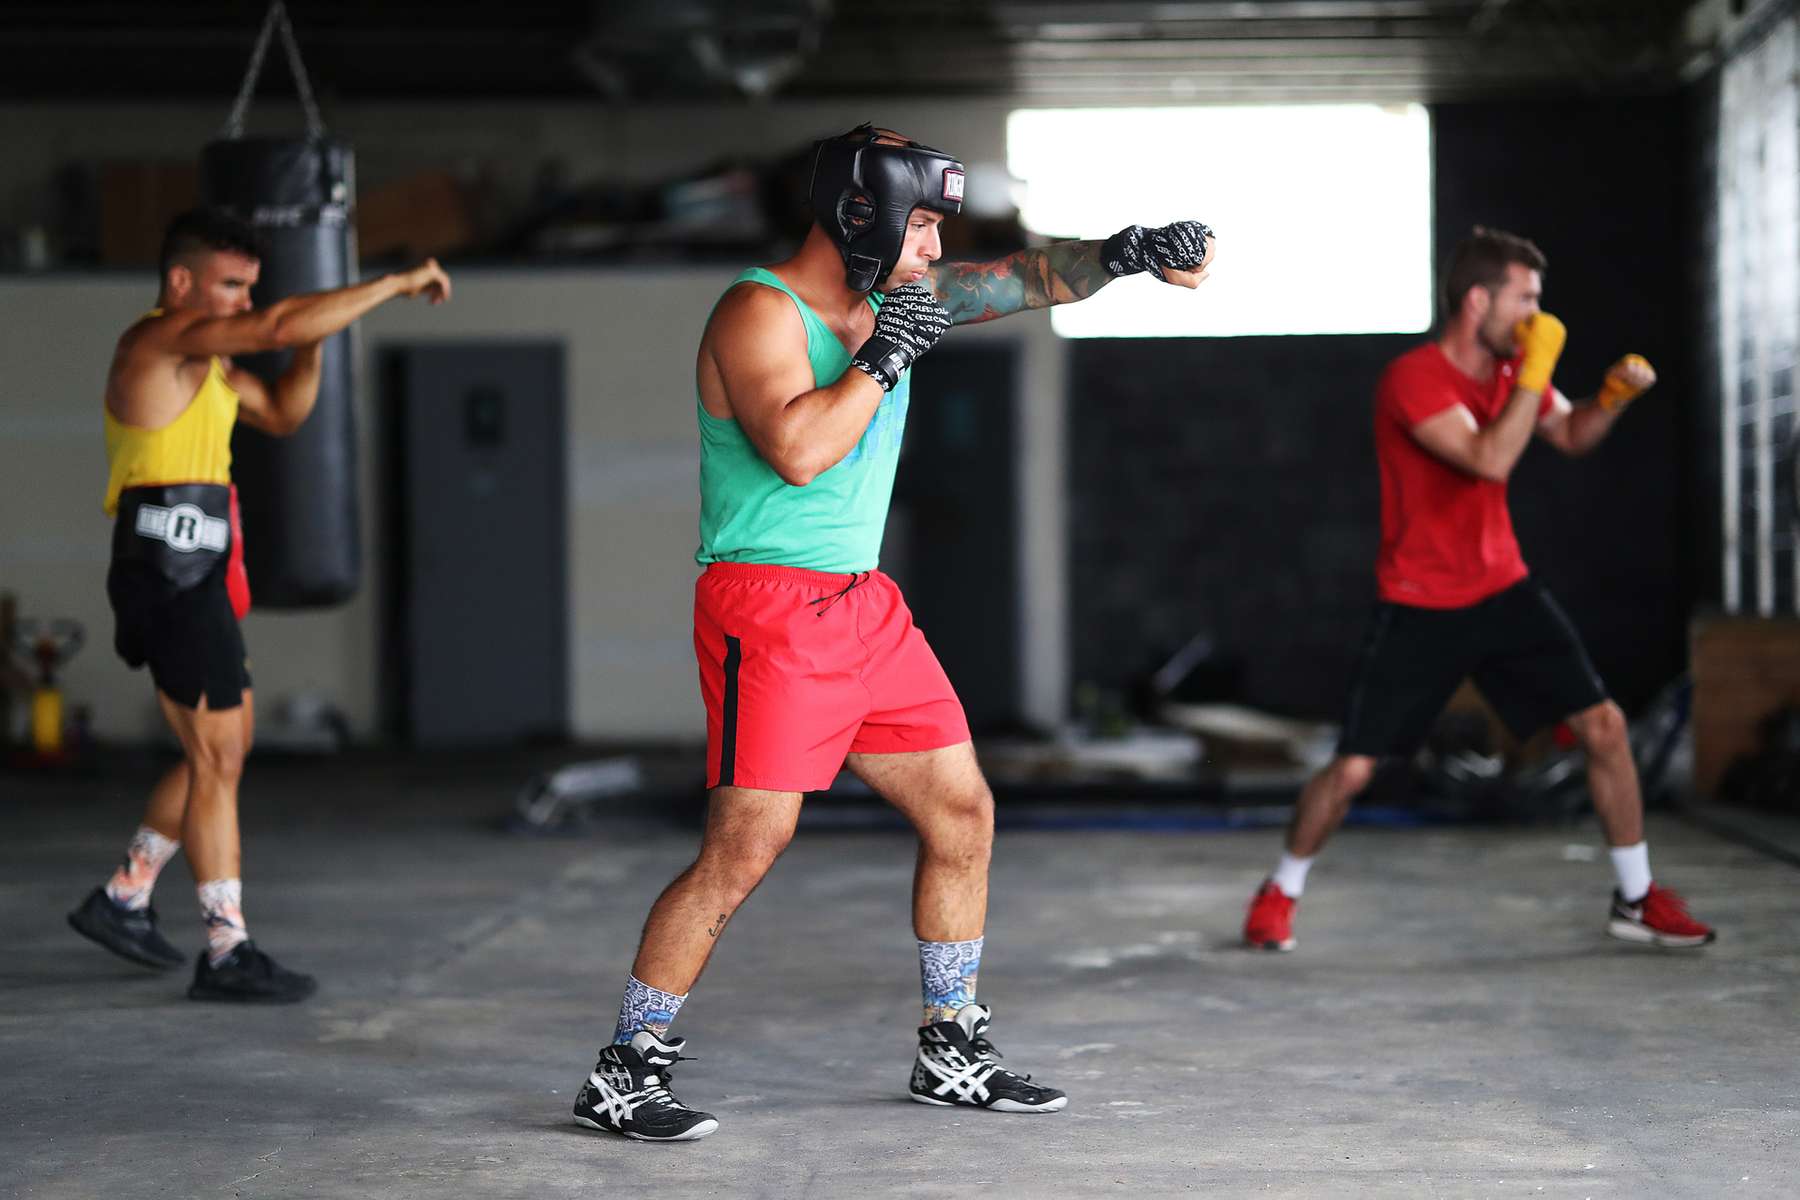 Amateur Kickboxer Sal Carillo (Front), New York Golden Gloves boxer Dennis Guerrero (right), and three time New York Golden Glove boxer Anthony Lopez, shadowbox during training session in a warehouse that was once Jetty gym on July 30, 2020 in Oceanside, New York. Guerrero, who is a co owner of Jetty has tried to hold many types of outdoor and open air workouts while the gym remains closed due to the coronavirus pandemic.  Since all gyms in New York had been closed since March 13, they have been trying to keep up financially to sustain the gym. Guerrero and his partner Michael Levitz have decided to closed their doors for good next week.  They will be moving their workouts online and at select locations.  Governor Andrew Cuomo announced that gyms will not be permitted to reopen during phase 4 until New York's Health Department determines if air filtering systems are circulating the coronavirus. More than 4,540,000 people in the United States alone have been infected with the coronavirus and at least 154,000 have died.  